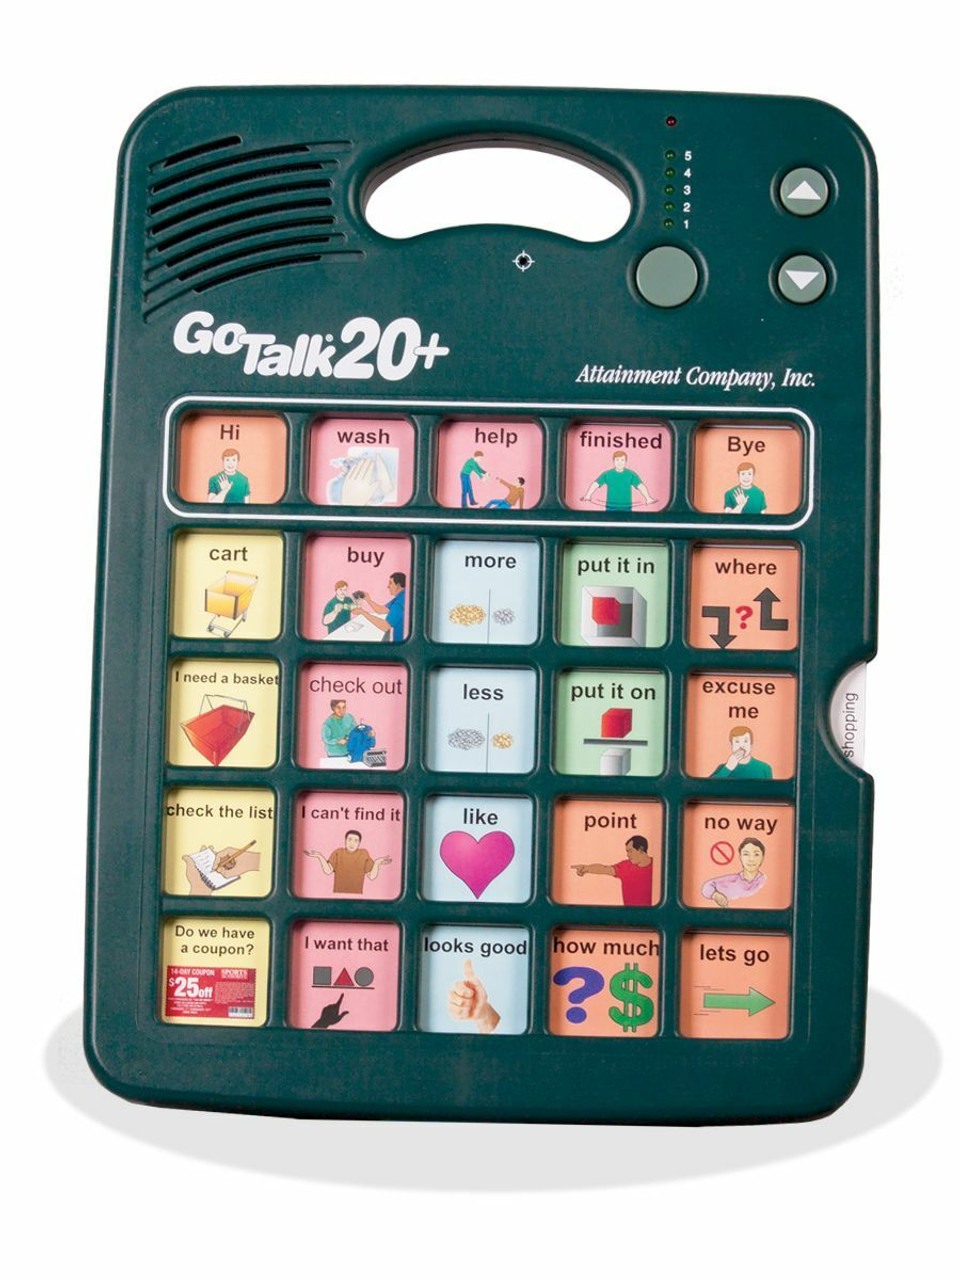 GoTalk 20+ has been discontinued and replaced with the GoTalk 20+ Lite Touch model. Please call or email for pricing.